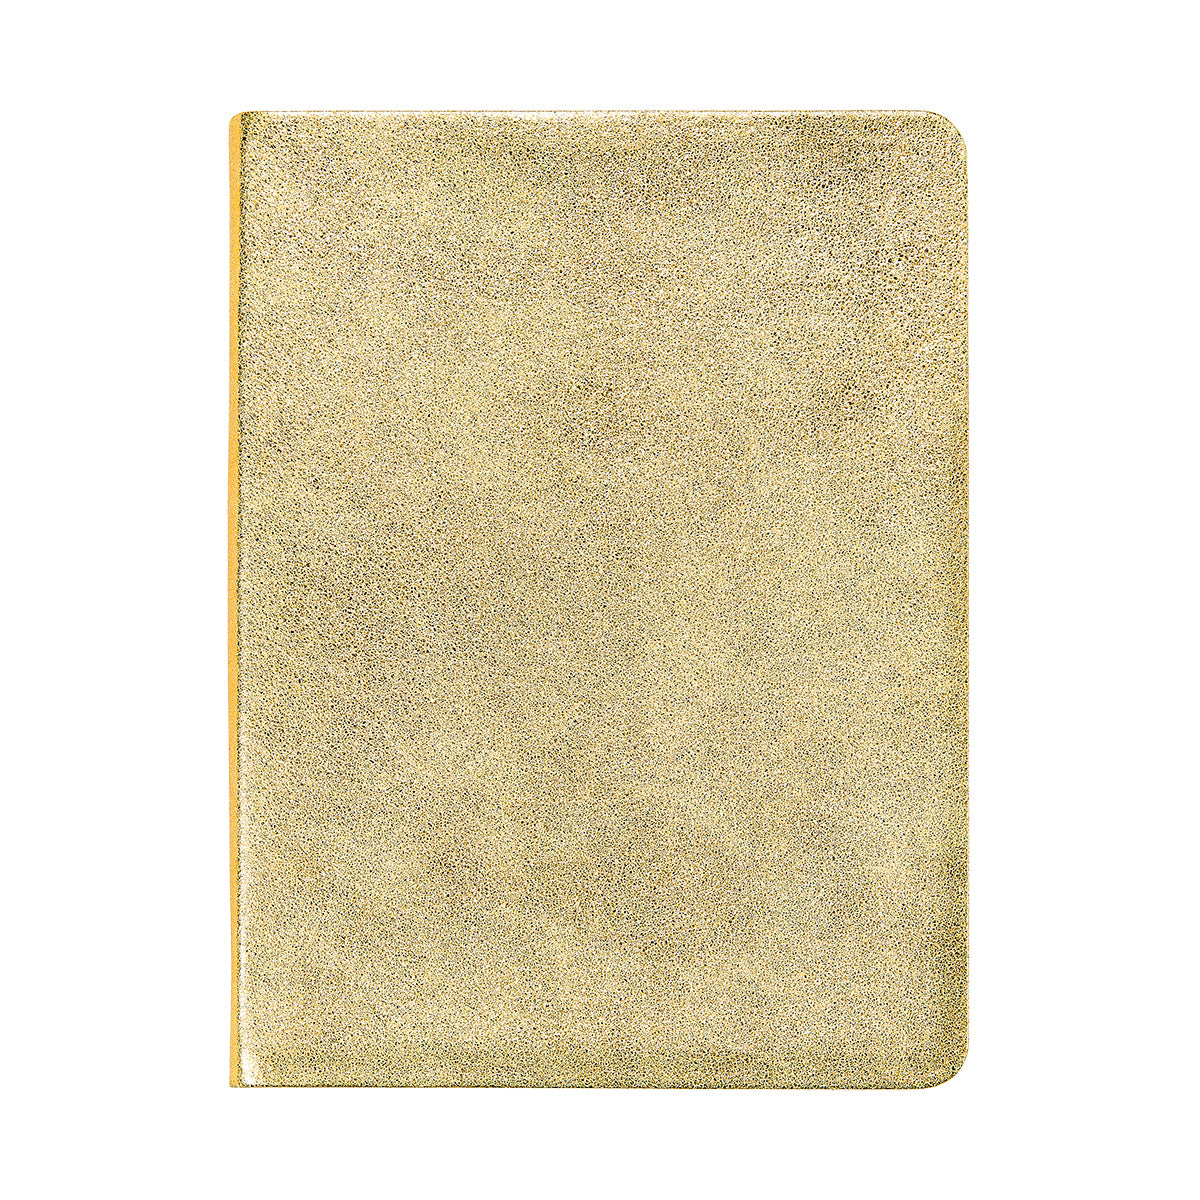 Graphic Image 9 Flexible Cover Journal Gold Goatskin Leather